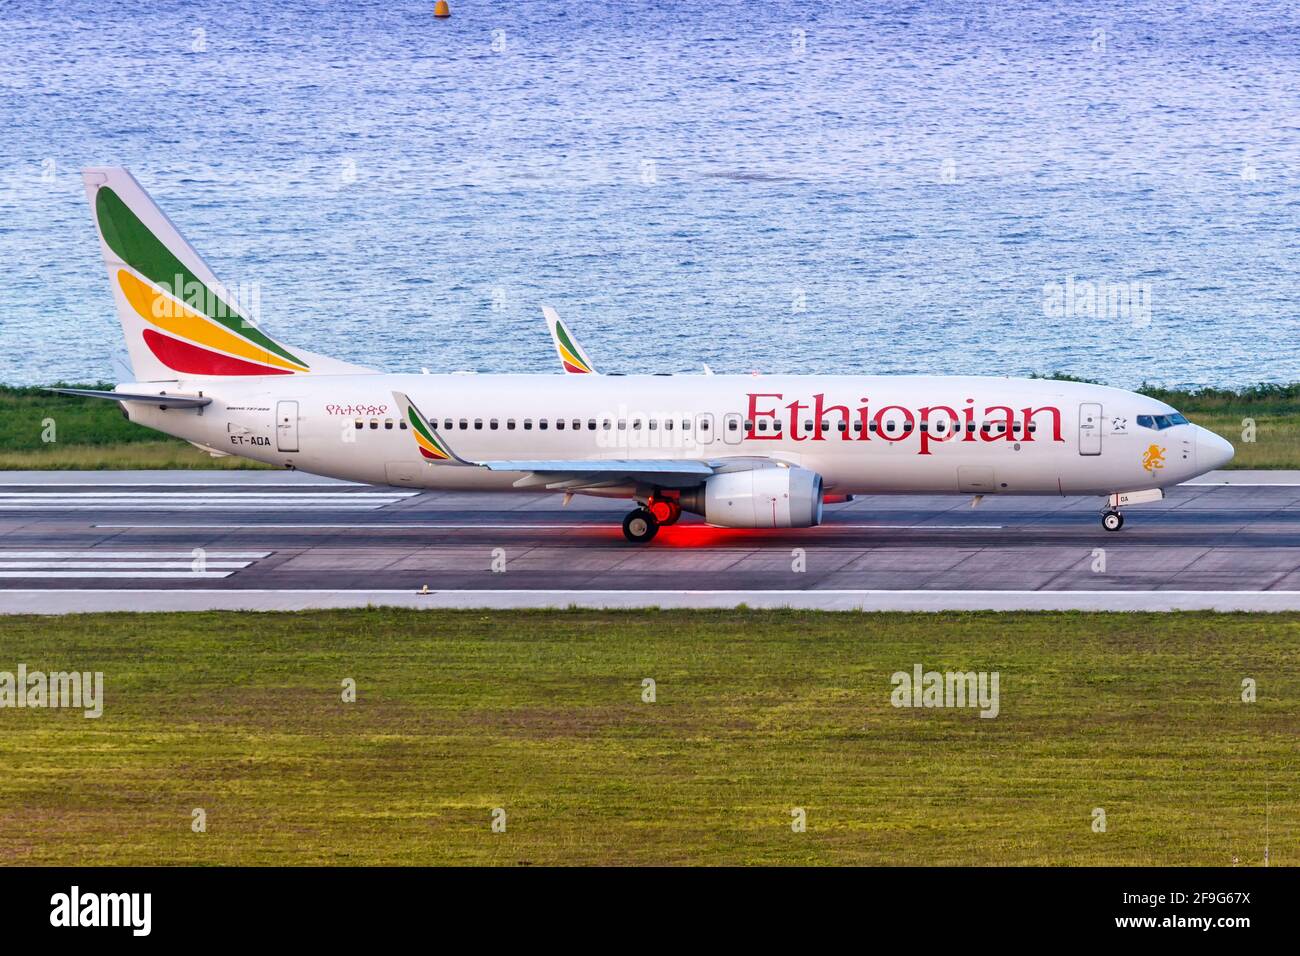 Mahe, Seychelles - November 23, 2017: Ethiopian Boeing 737-800 airplane at Seychelles International Airport (SEZ) in the Seychelles. Boeing is an Amer Stock Photo